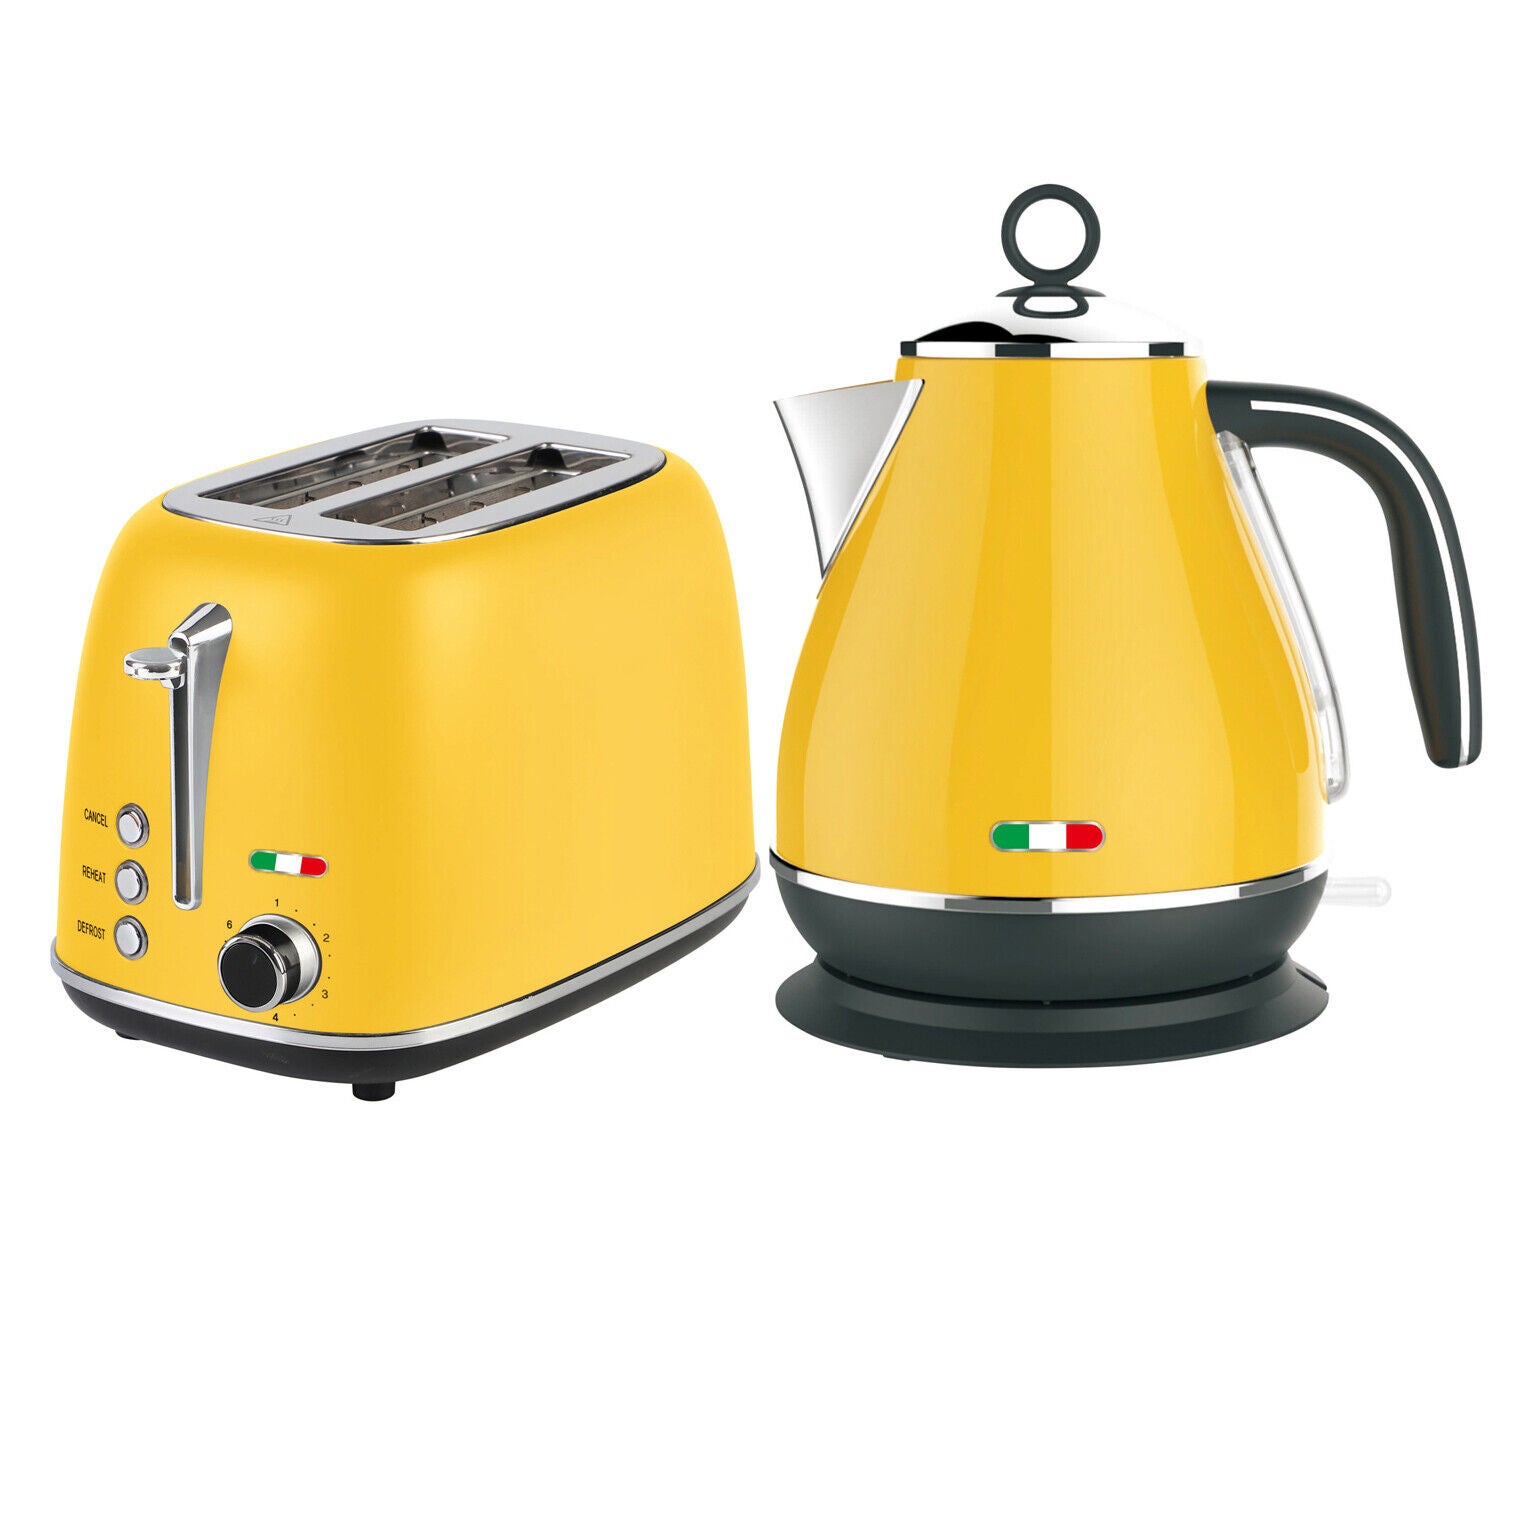 Vintage Electric Kettle and 2 Slice Toaster SET Combo Deal Stainless Steel Yellow